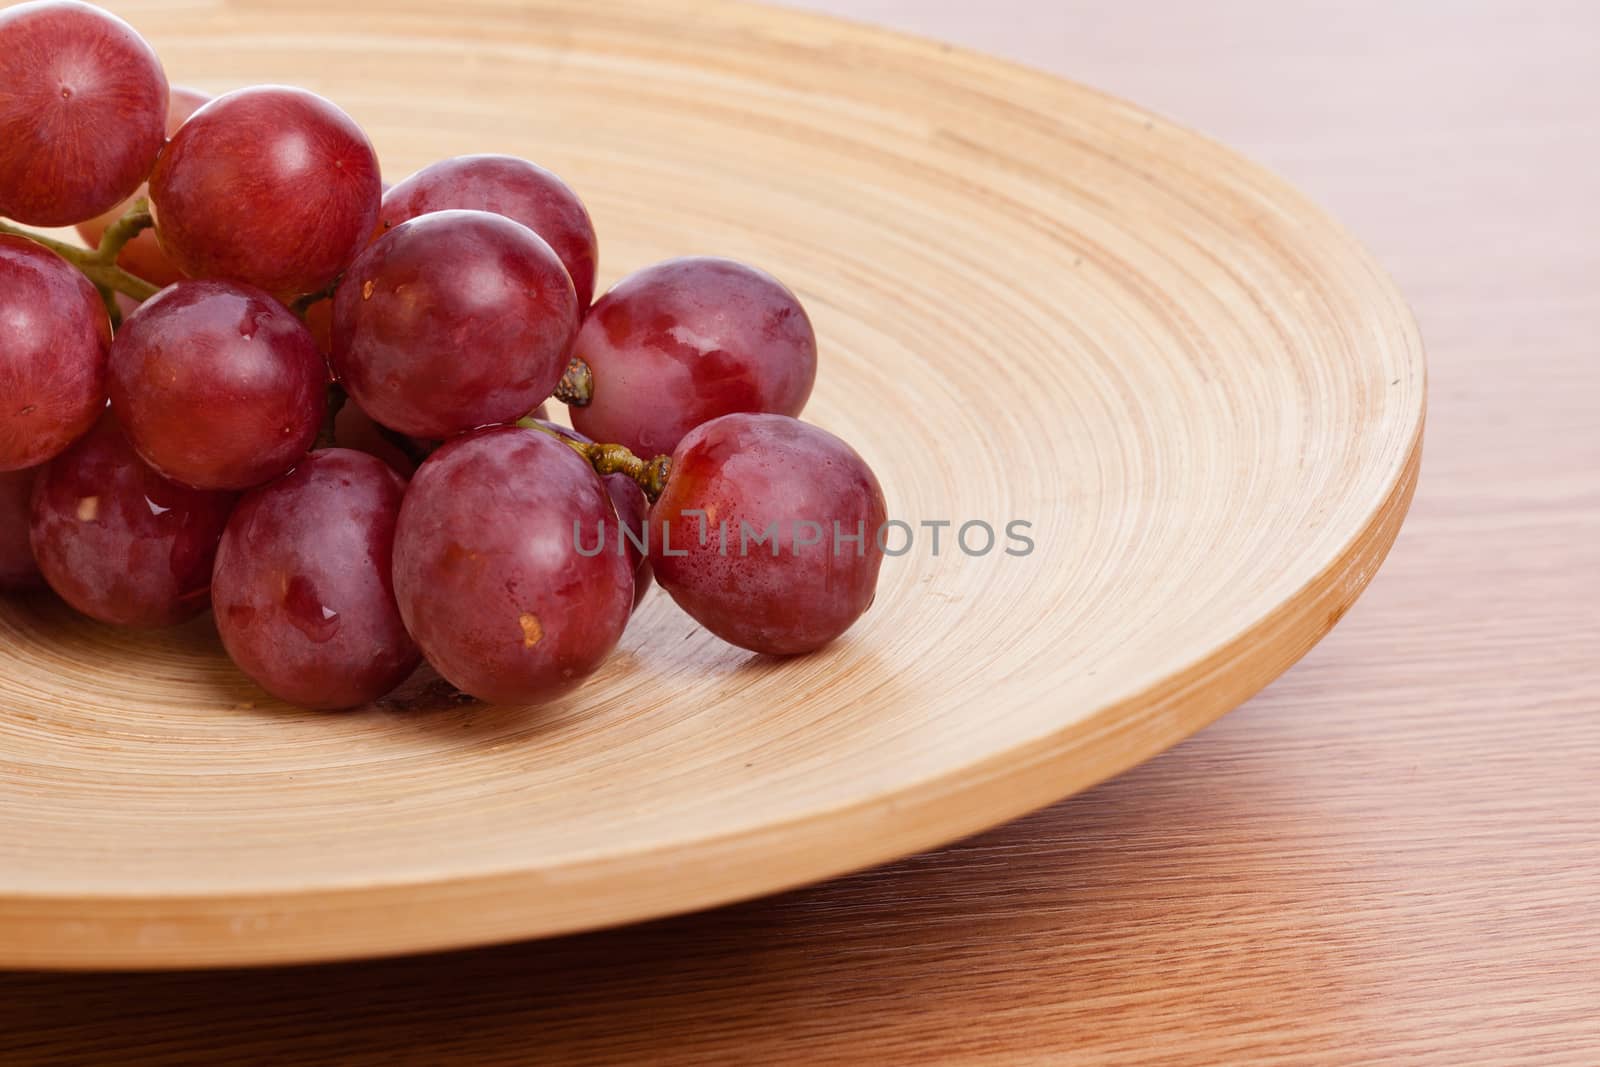 Big rose grapes on a wooden plate